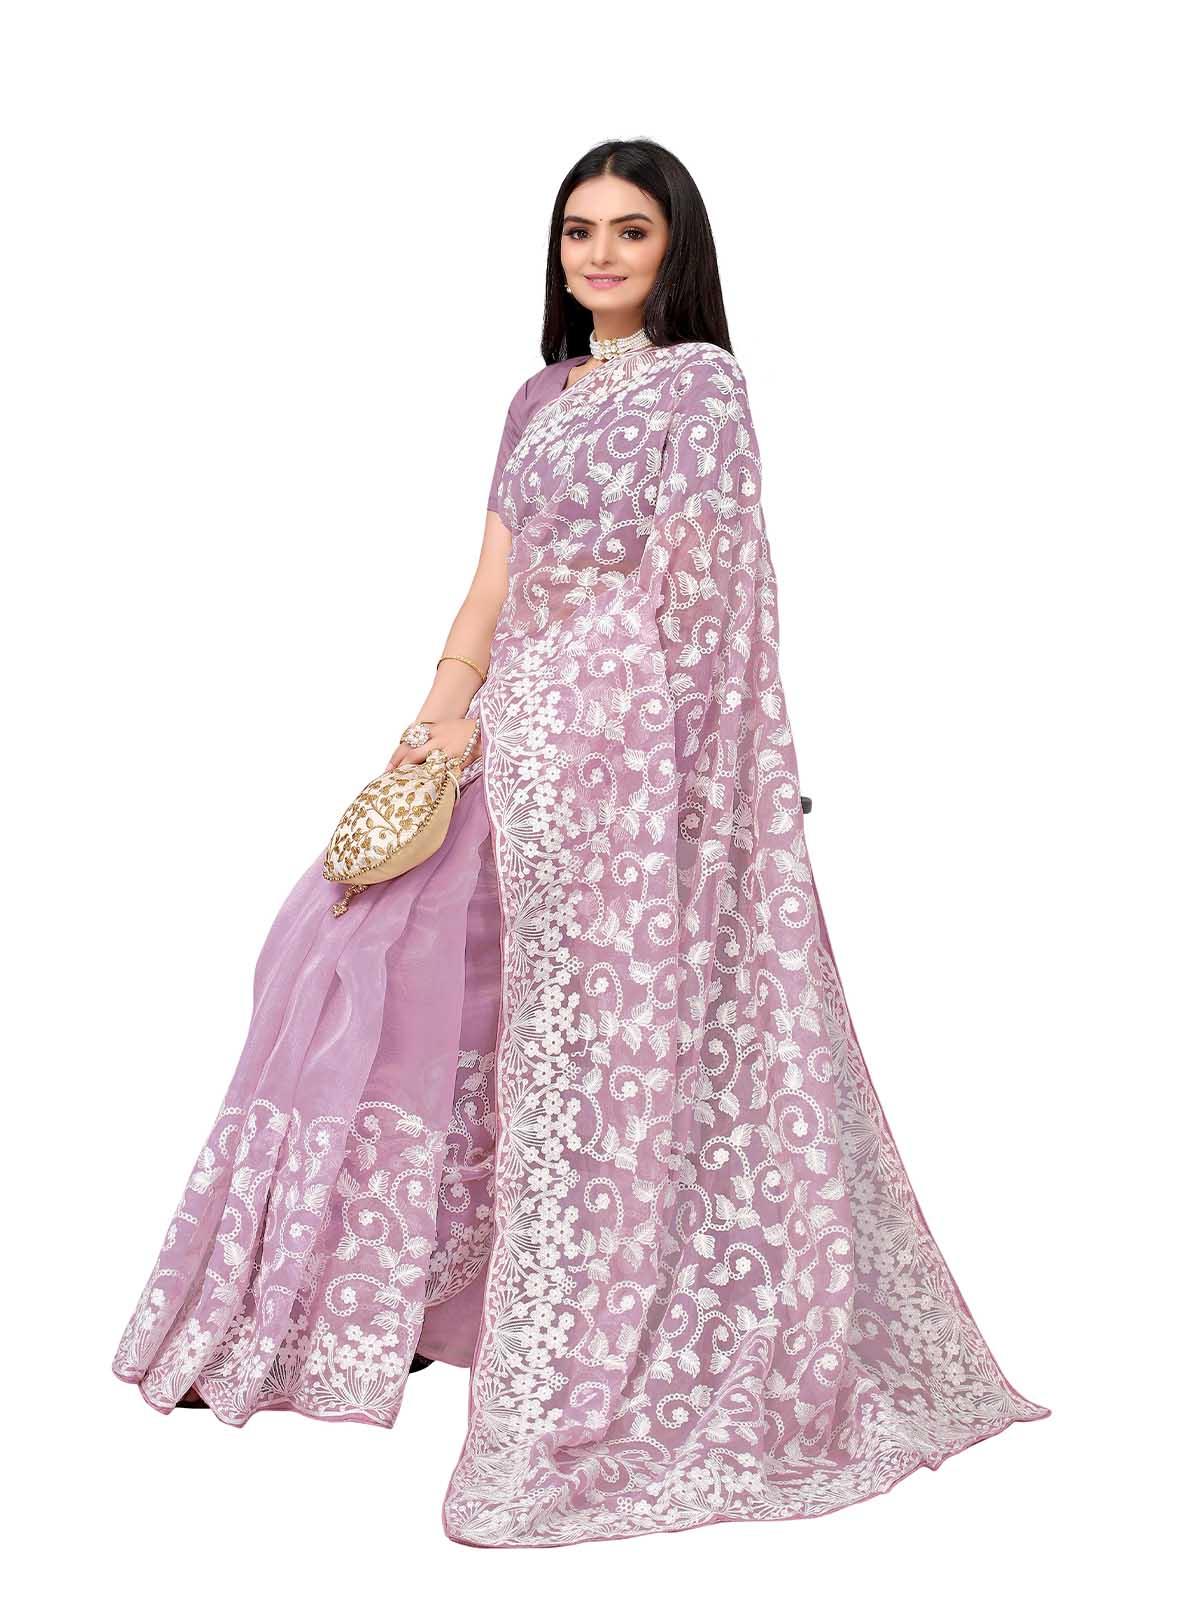 Lilac Organza Embroidered Saree With Blouse - Odette